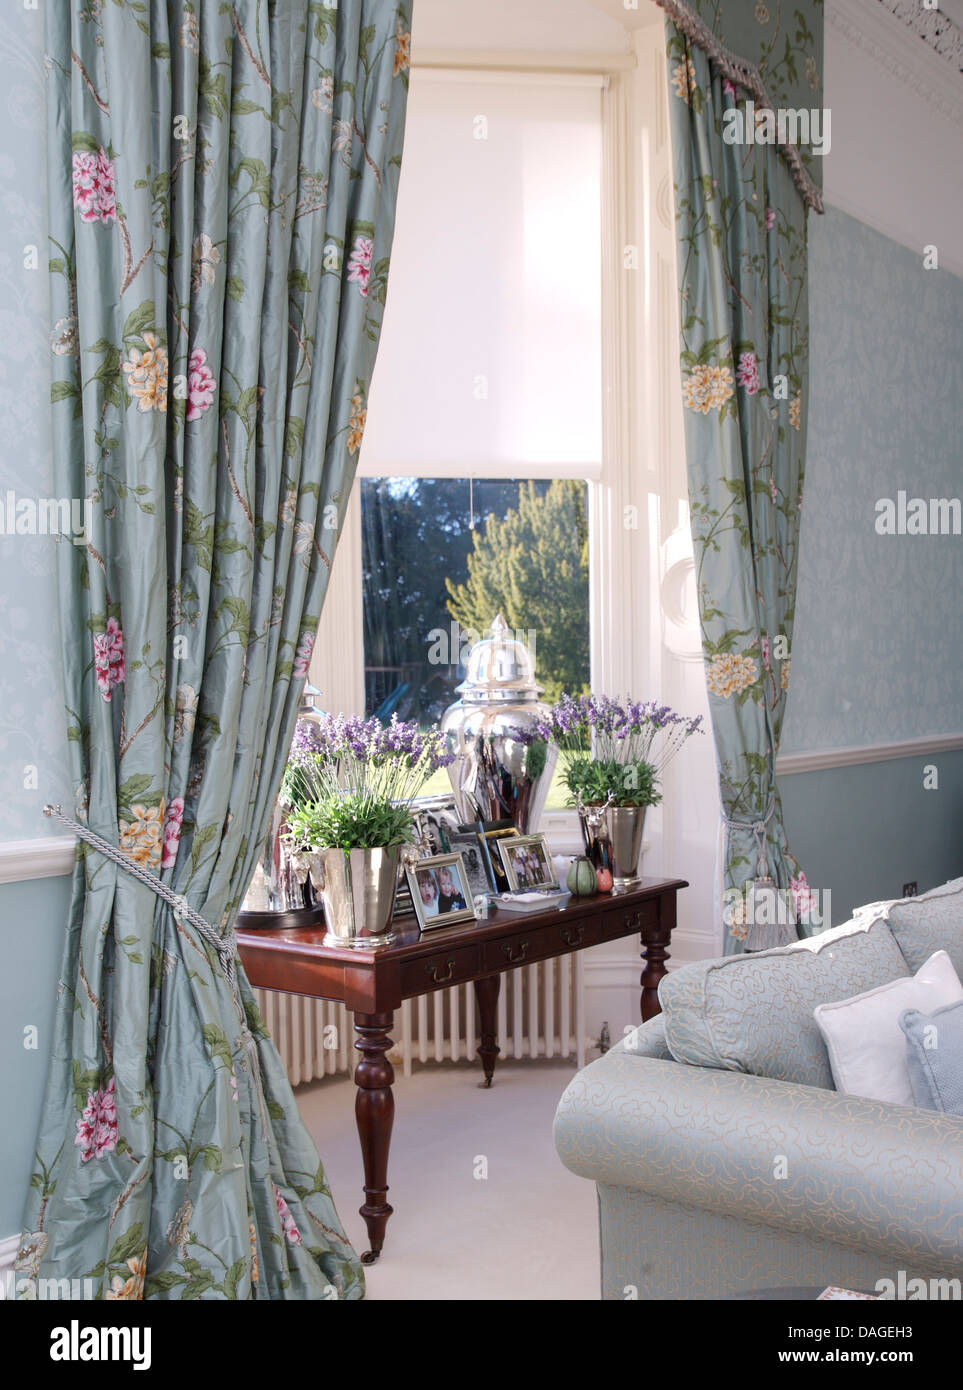 Pots Of Lavender On Table In Window With Pale Blue Floral Curtains Stock Photo Alamy